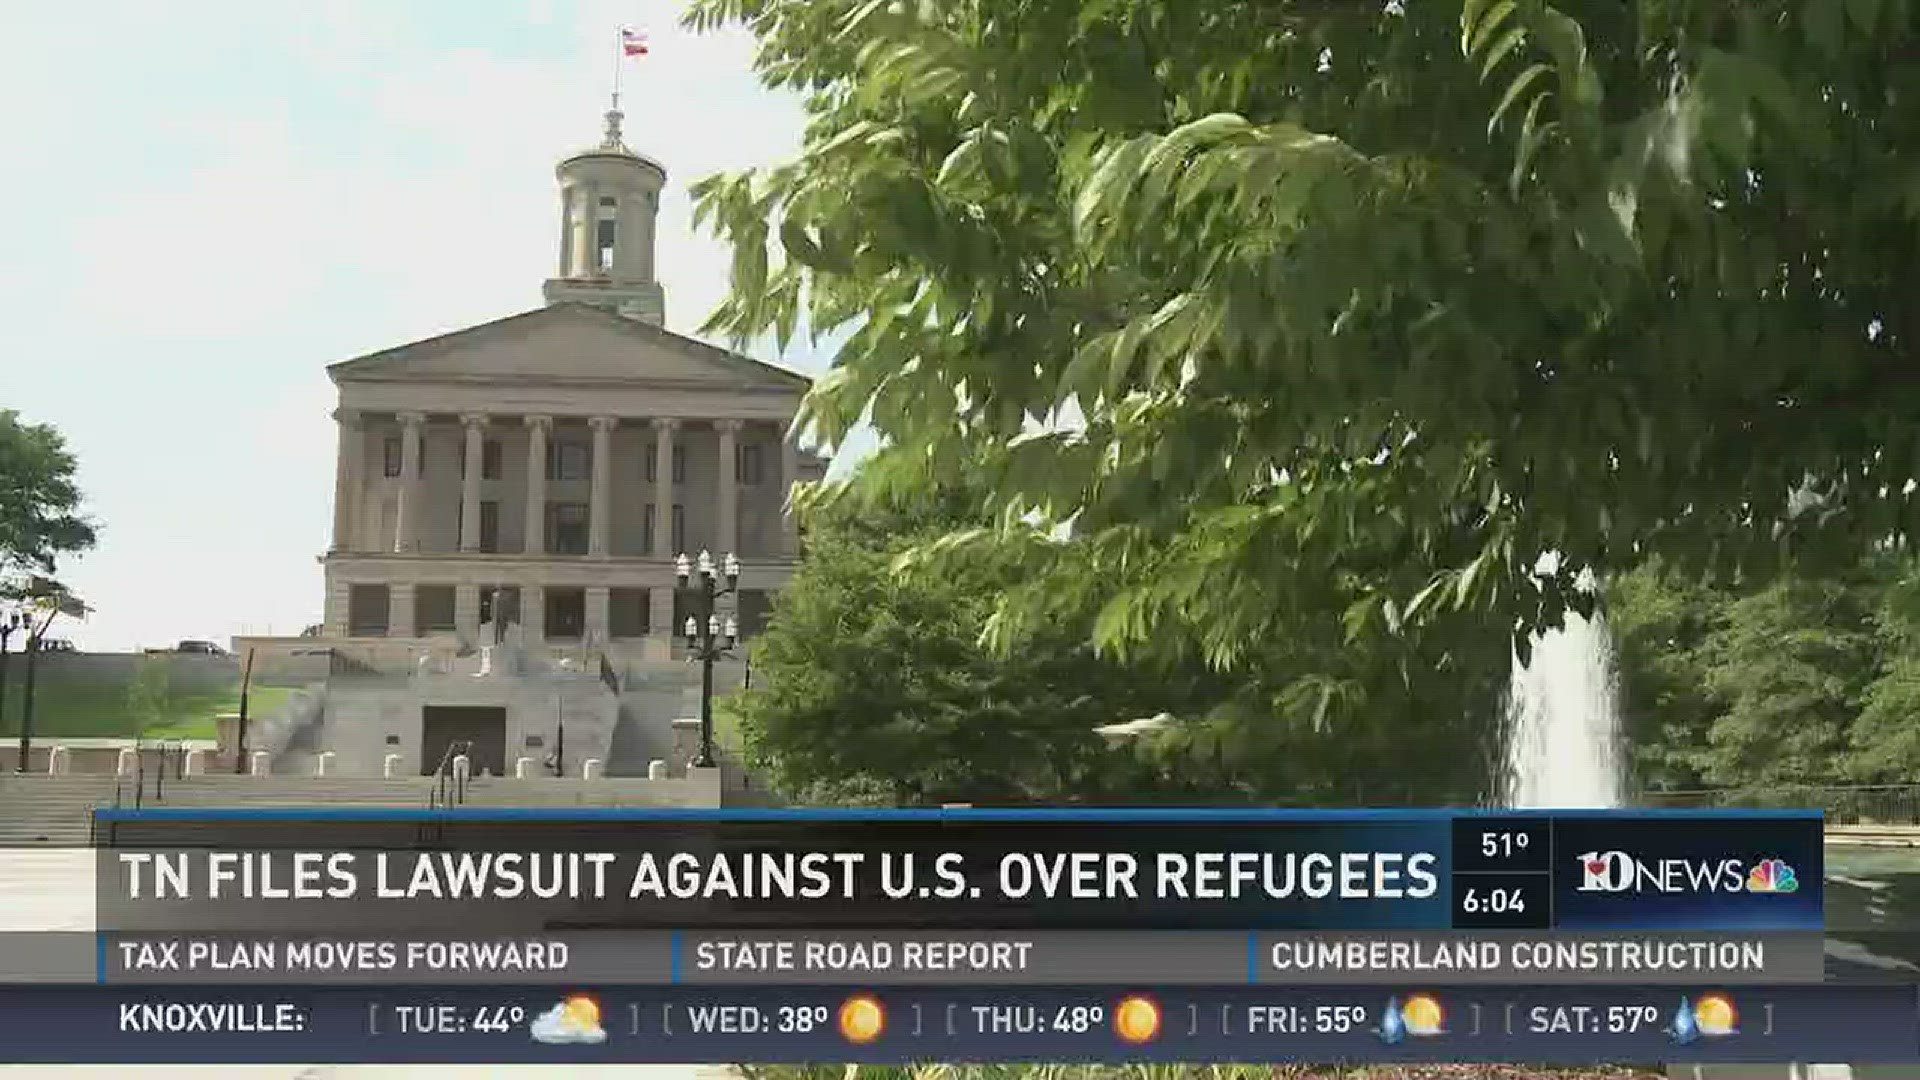 March 13, 2017: Tennessee became the first state to sue the federal government over refugee resettlement on the grounds of the 10th amendment.